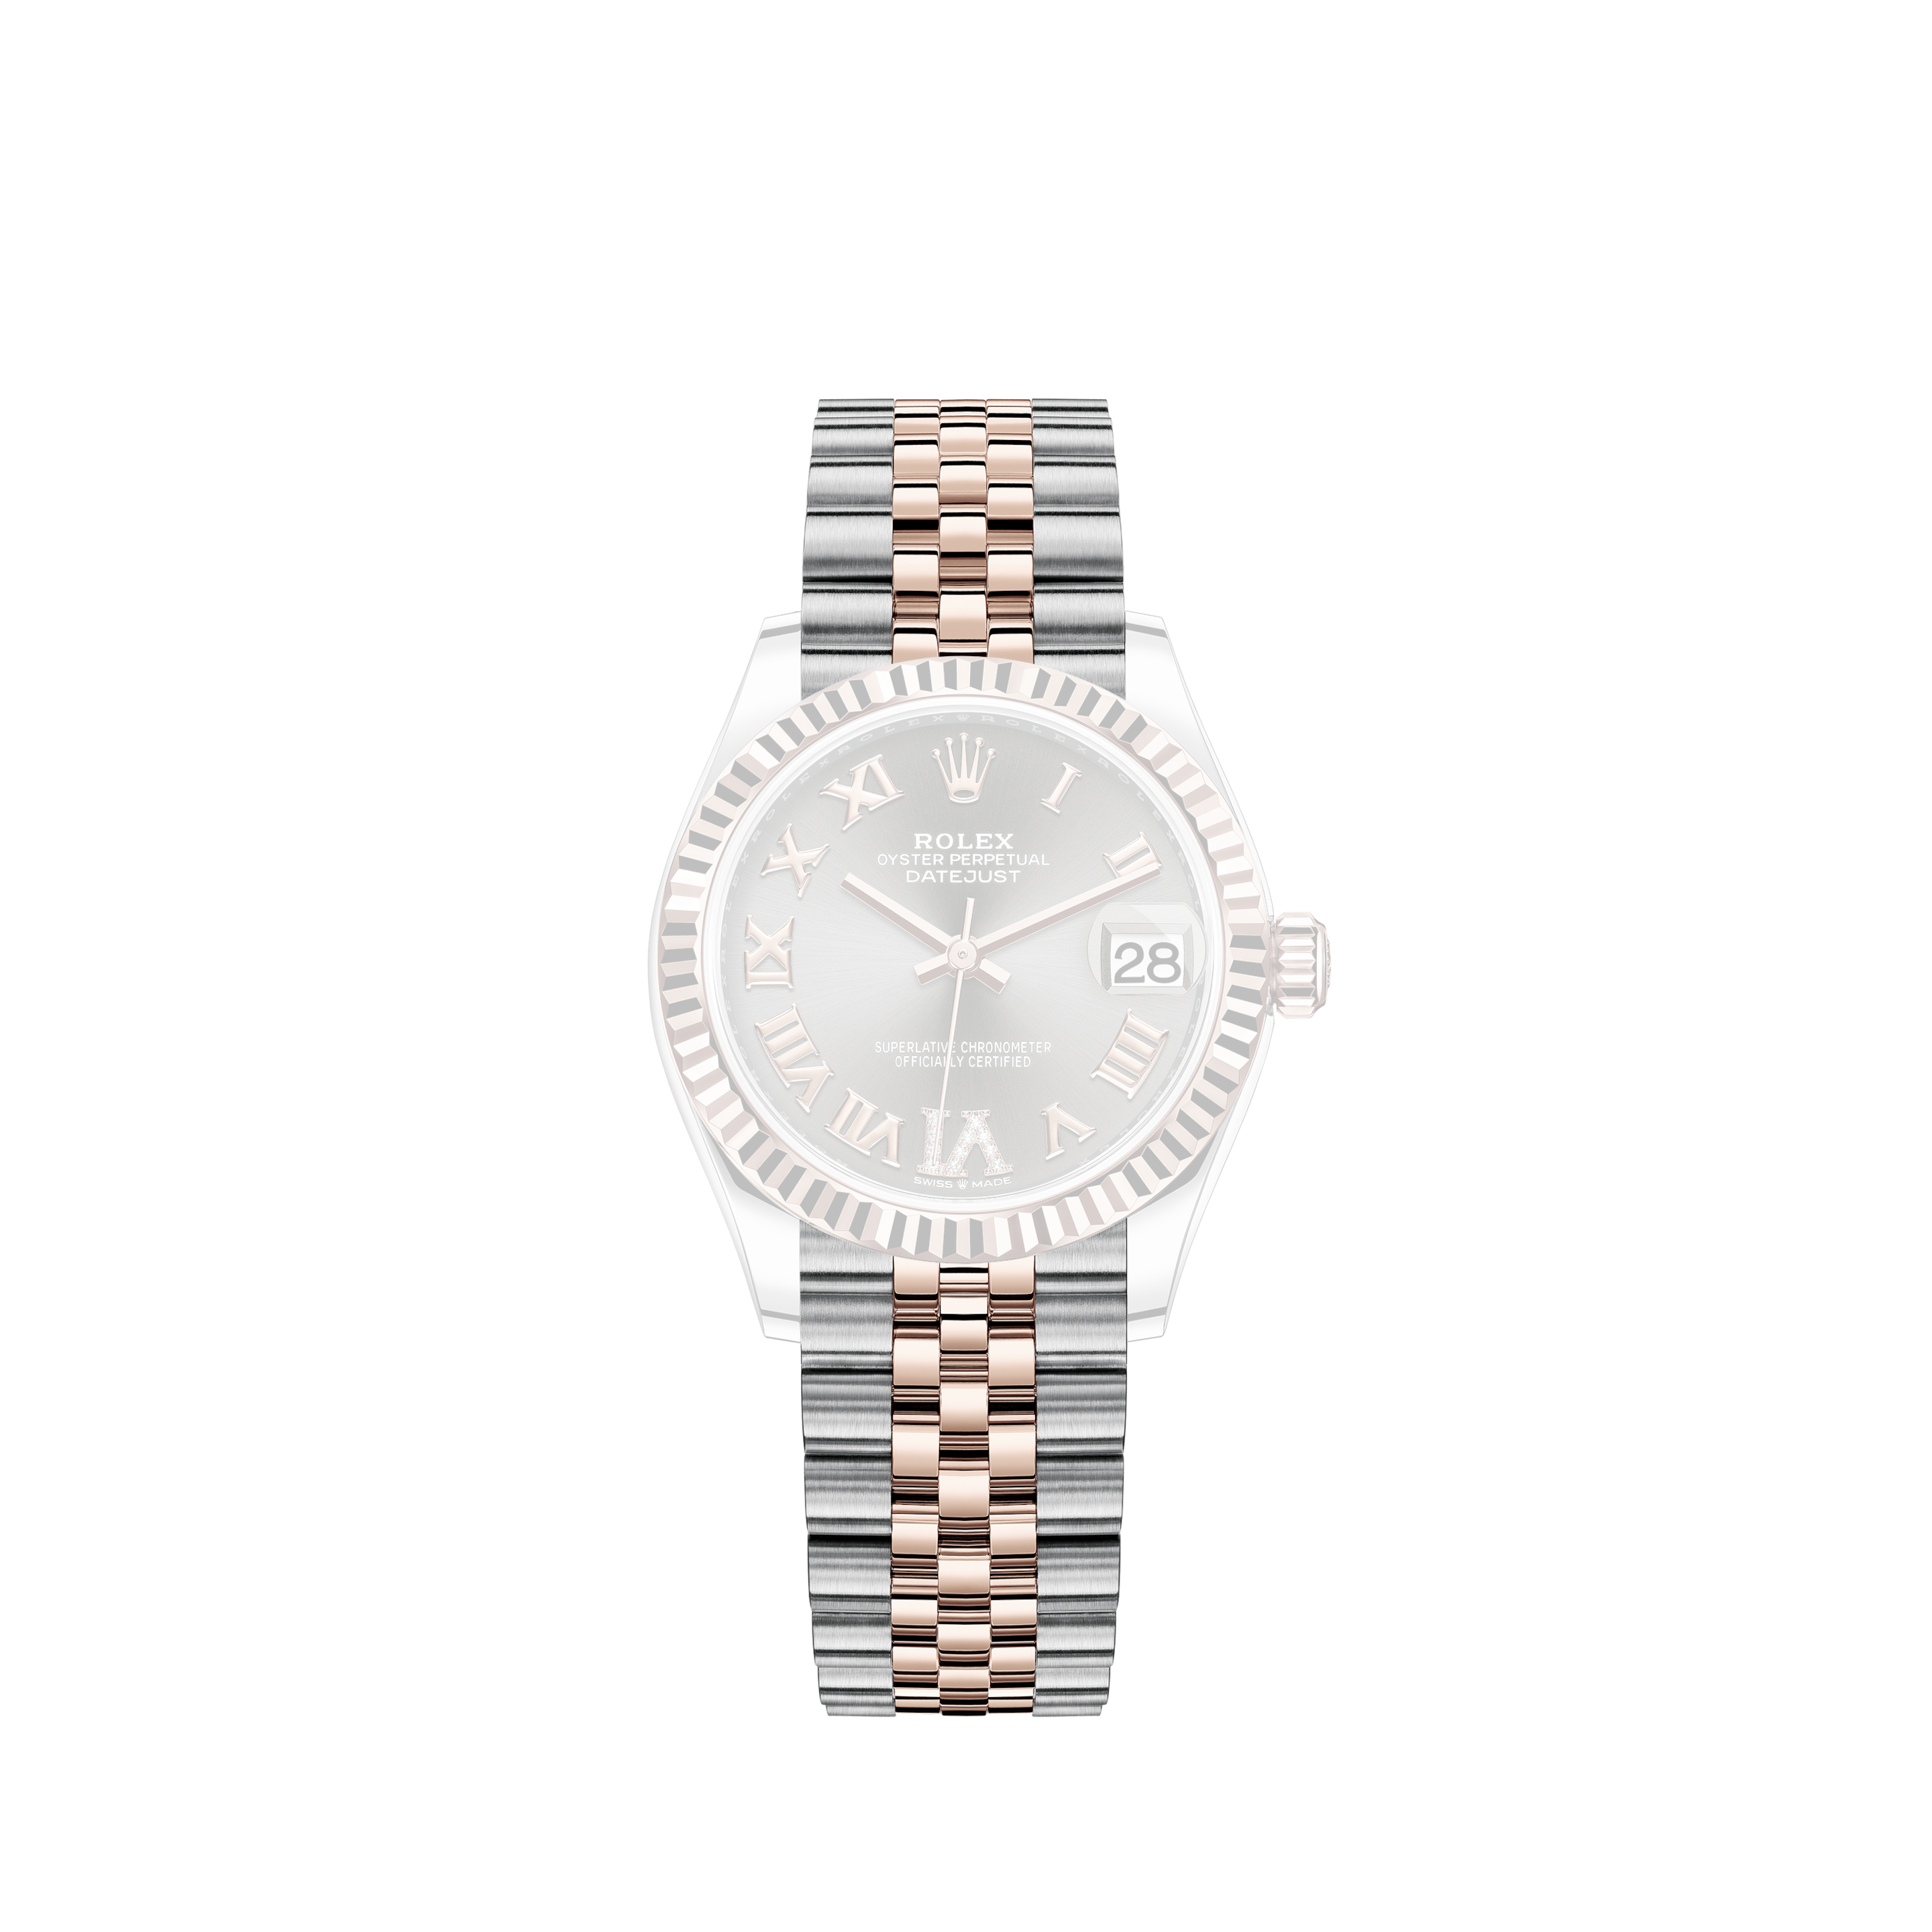 Rolex Datejust 36mm - Steel and Gold Pink Gold - Domed Bezel - Jubilee 126201 WRJRolex Datejust 36mm - Steel and Gold Pink Gold - Fluted Bezel - Jubilee 126231 DKRDR69J